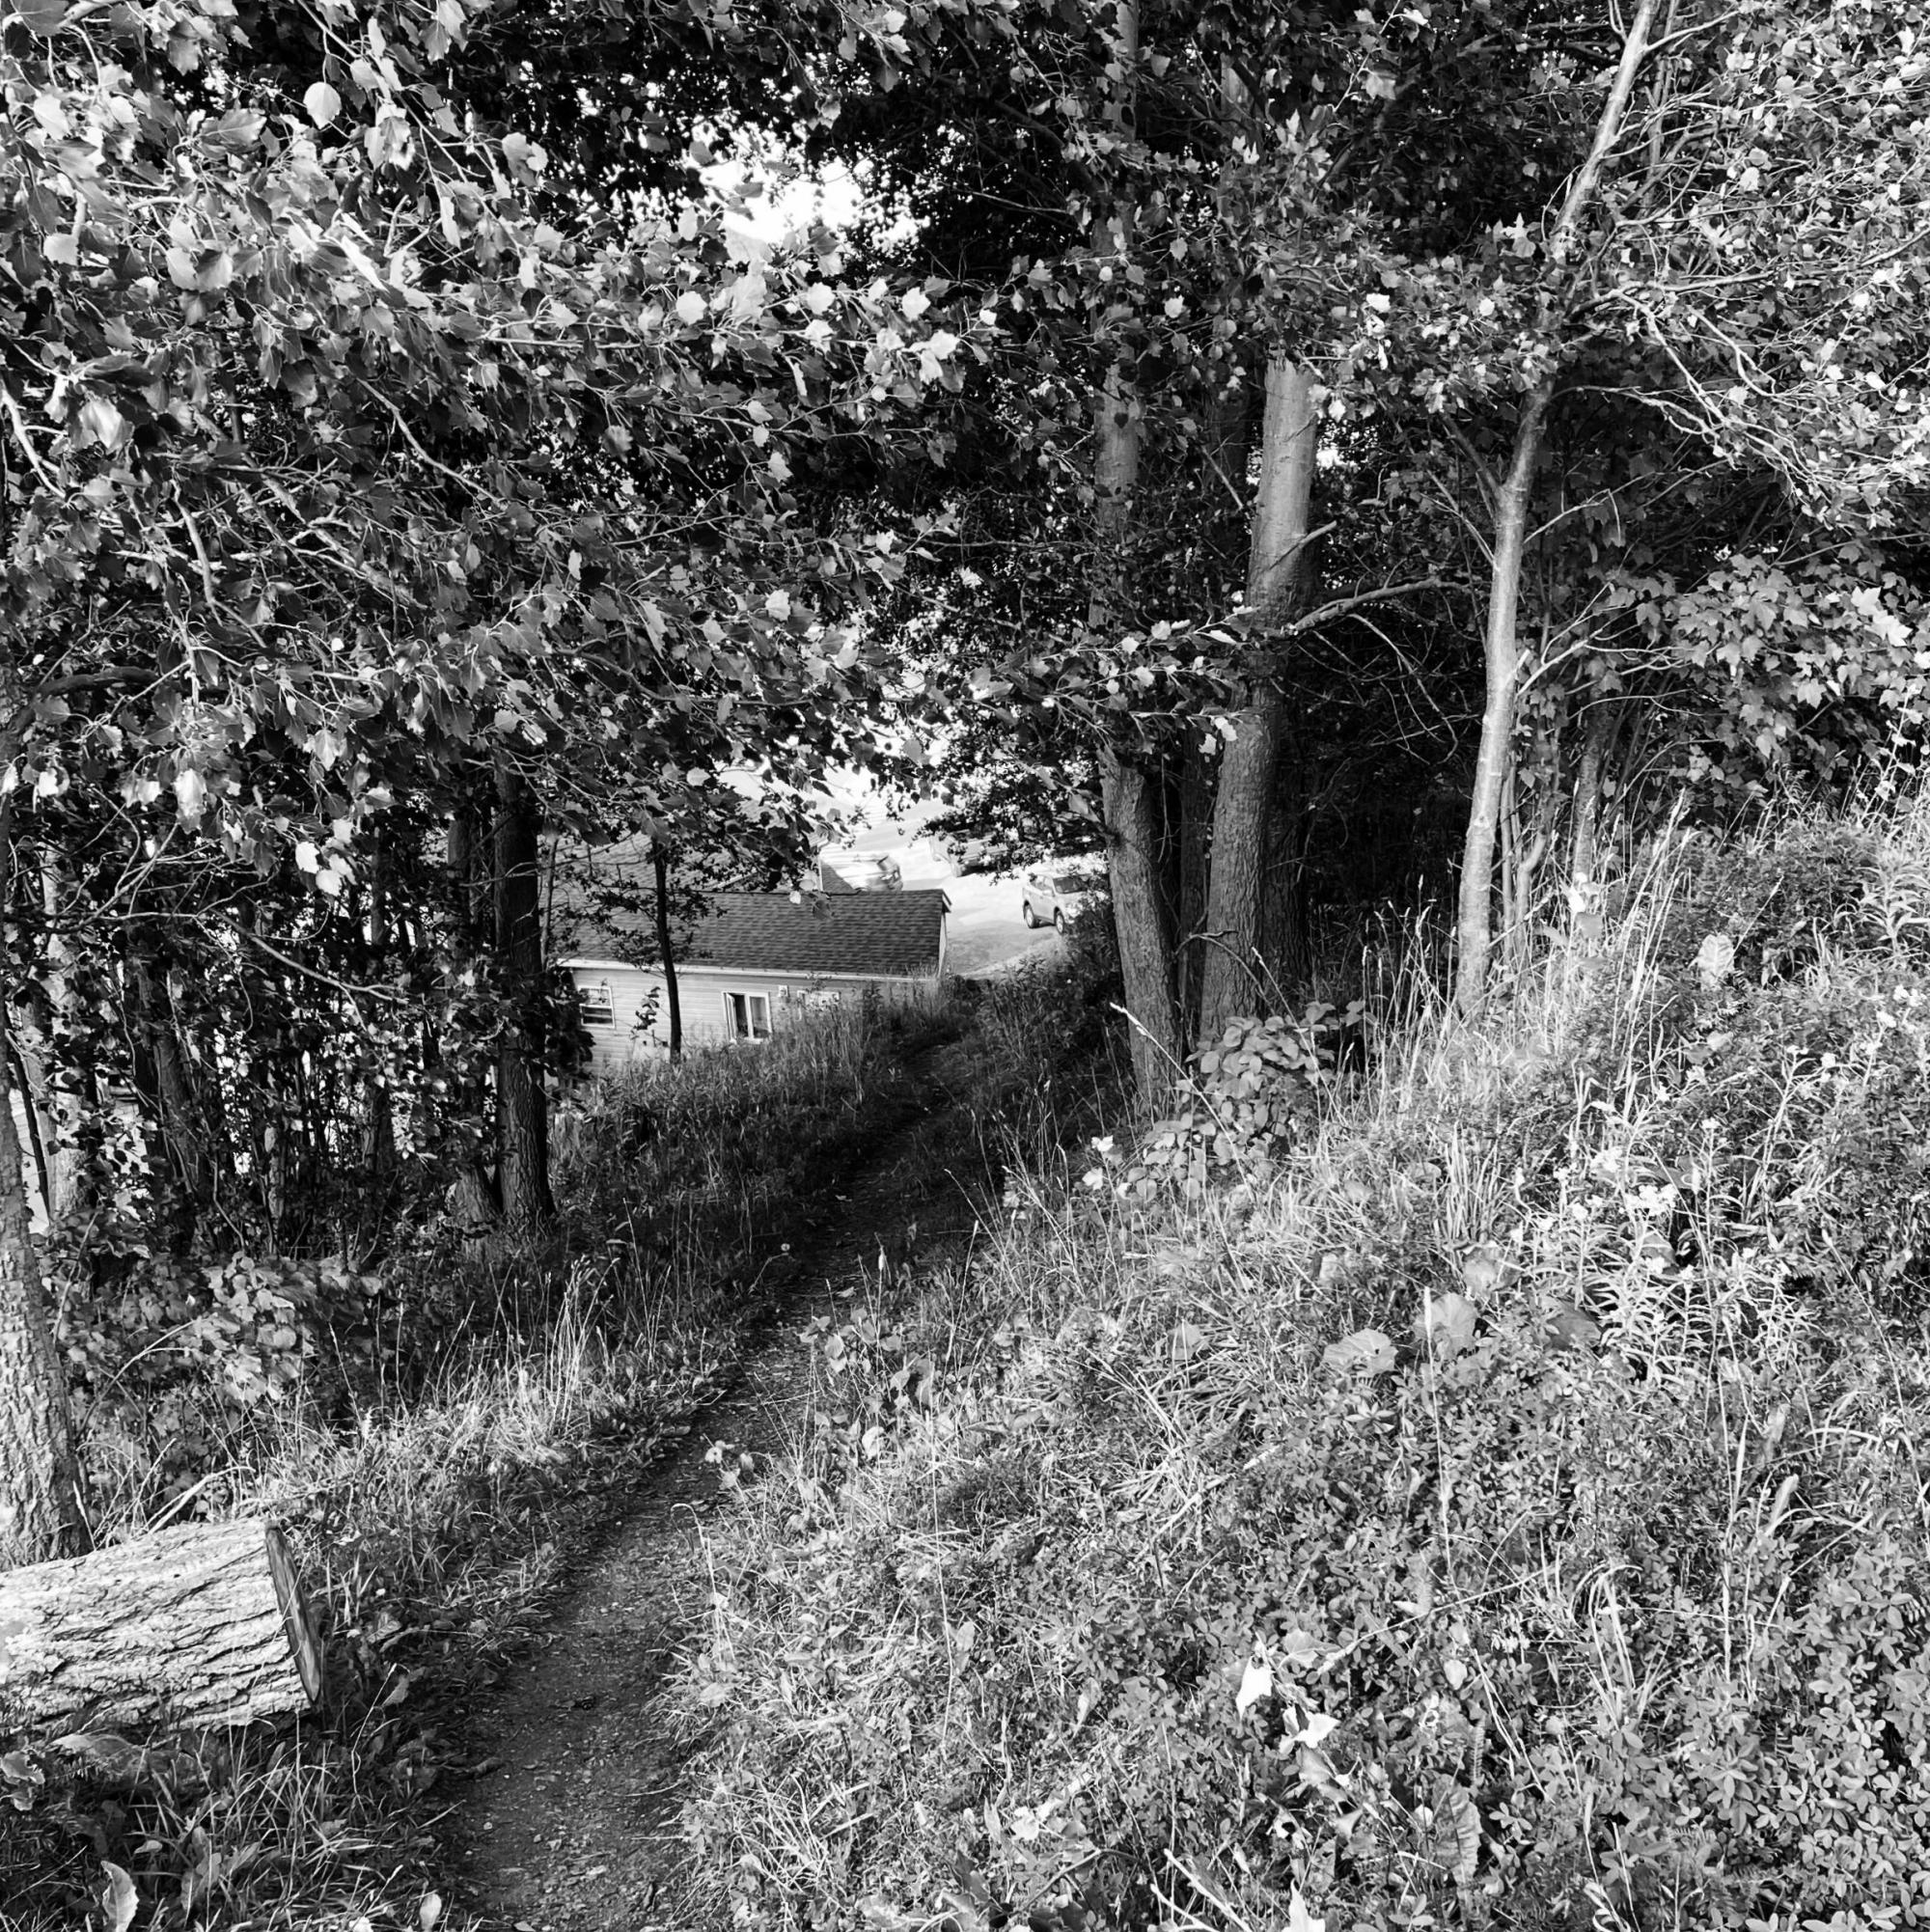 [ID: "Black and white photo of a trail in the woods leading towards a house."]